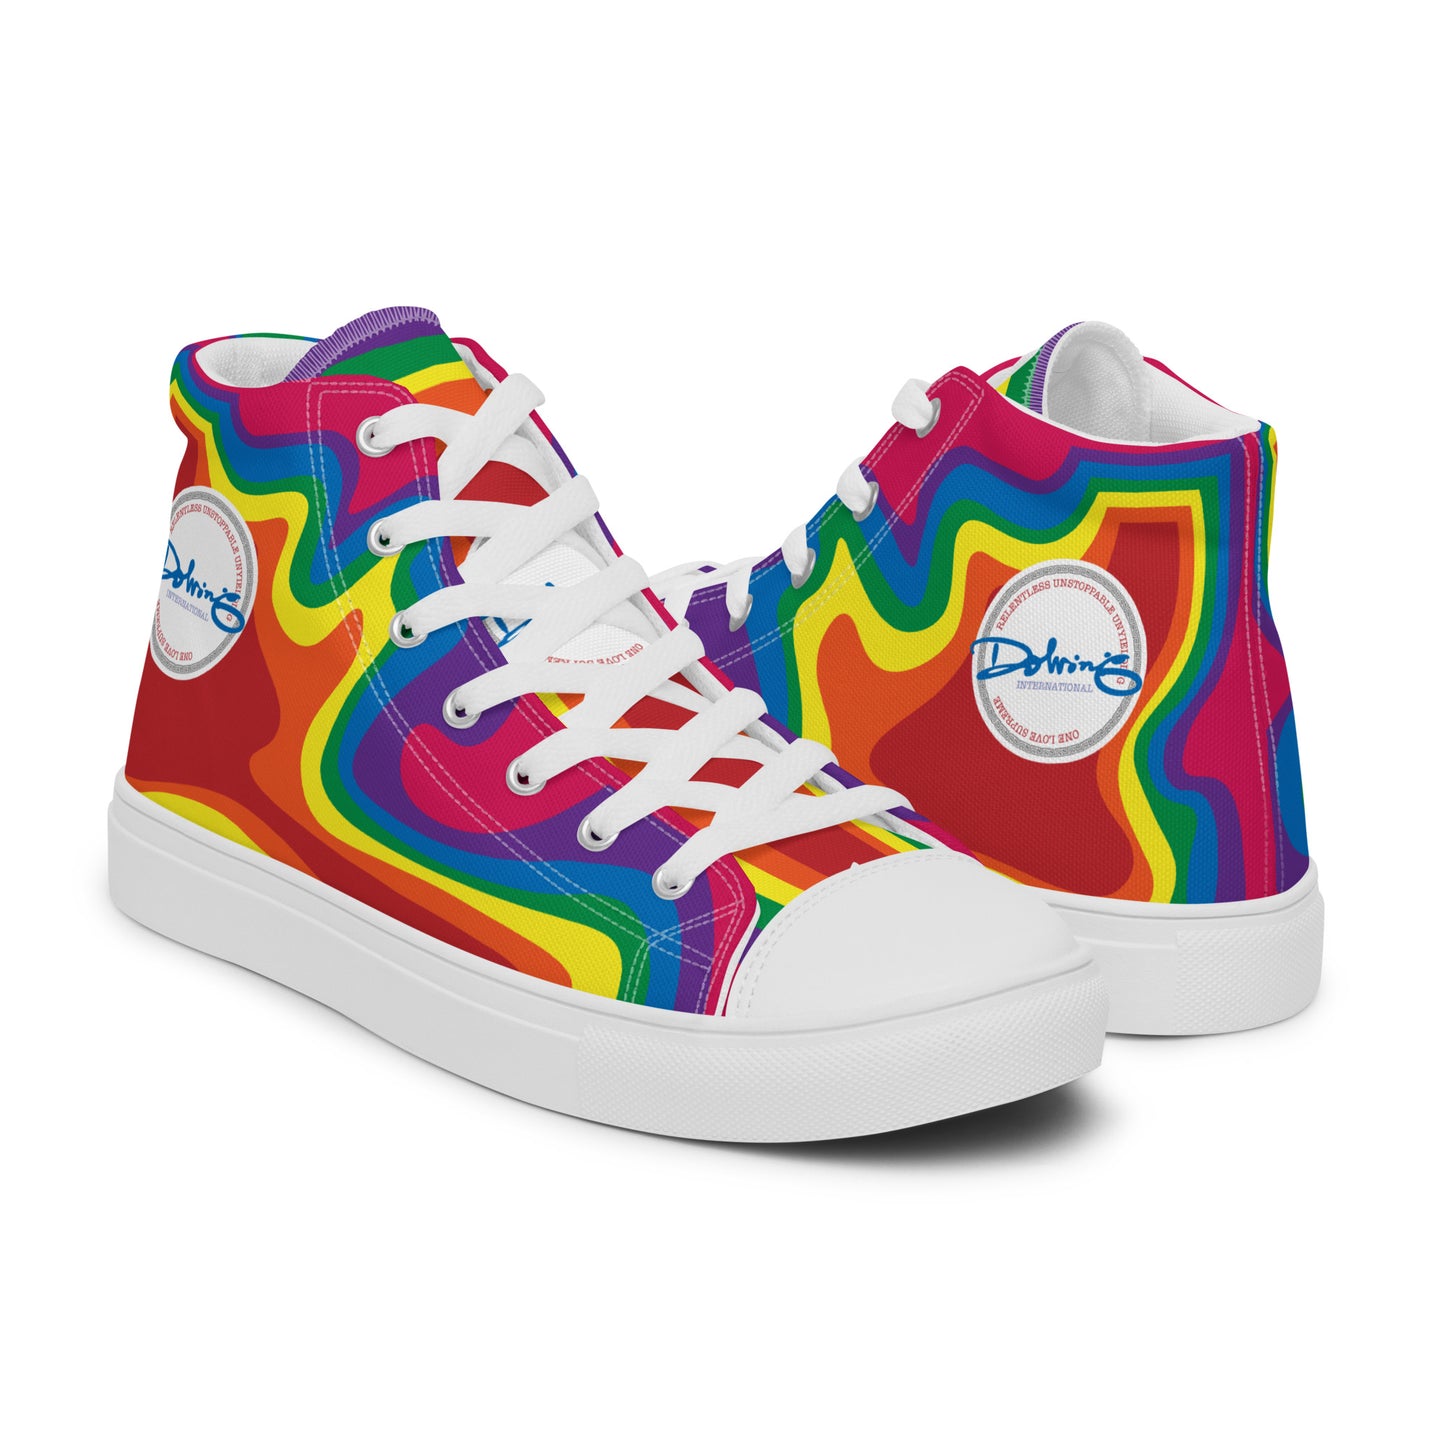 BALTHAZAR by DOLVING - Women’s high top canvas shoes